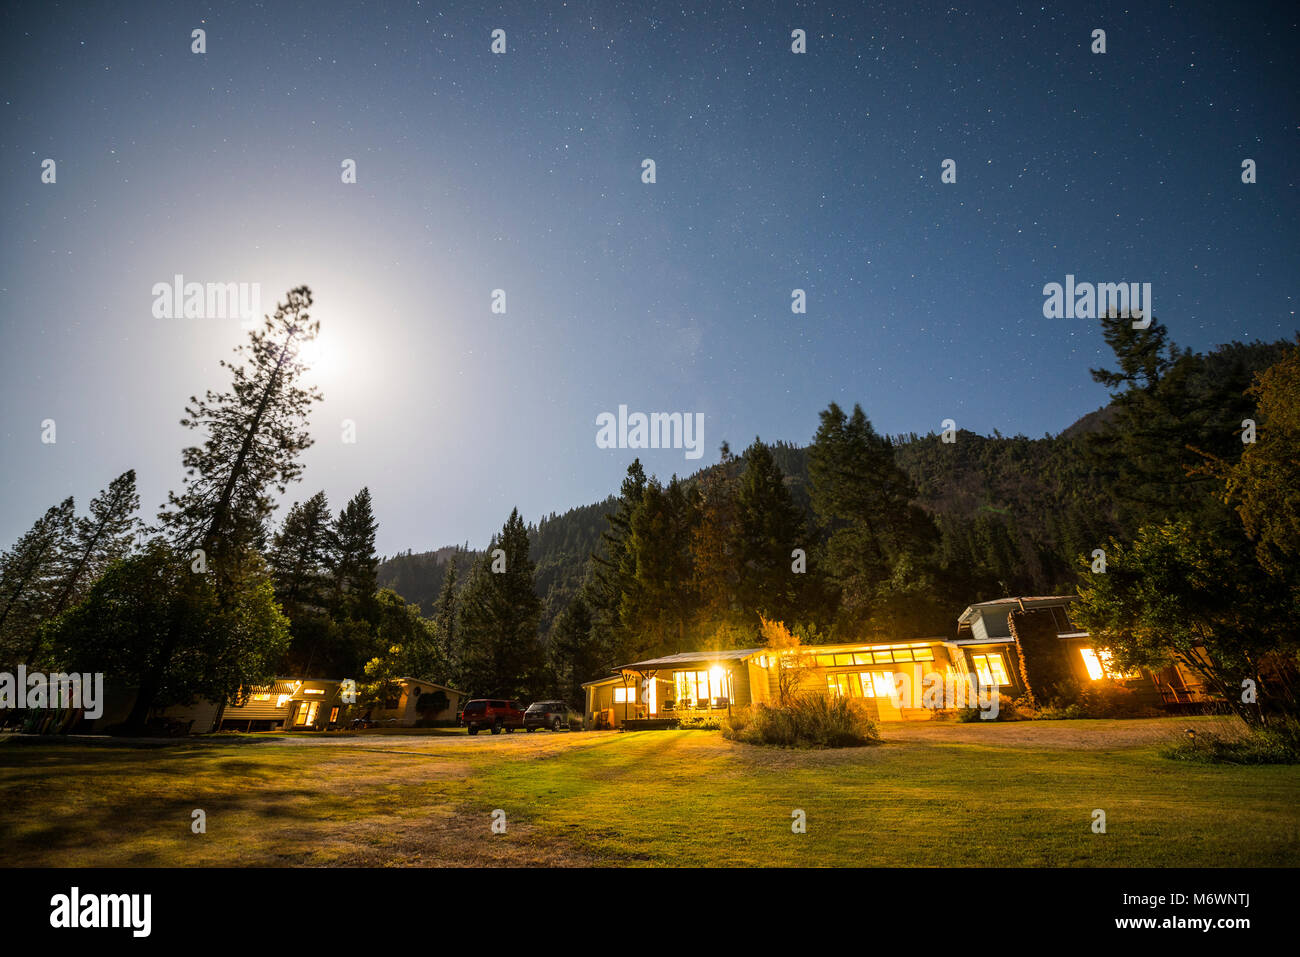 The Otter Bar Lodge and Kayak School is illuminated at night under a full moon with stars in the sky in Forks of Salmon, California. Stock Photo